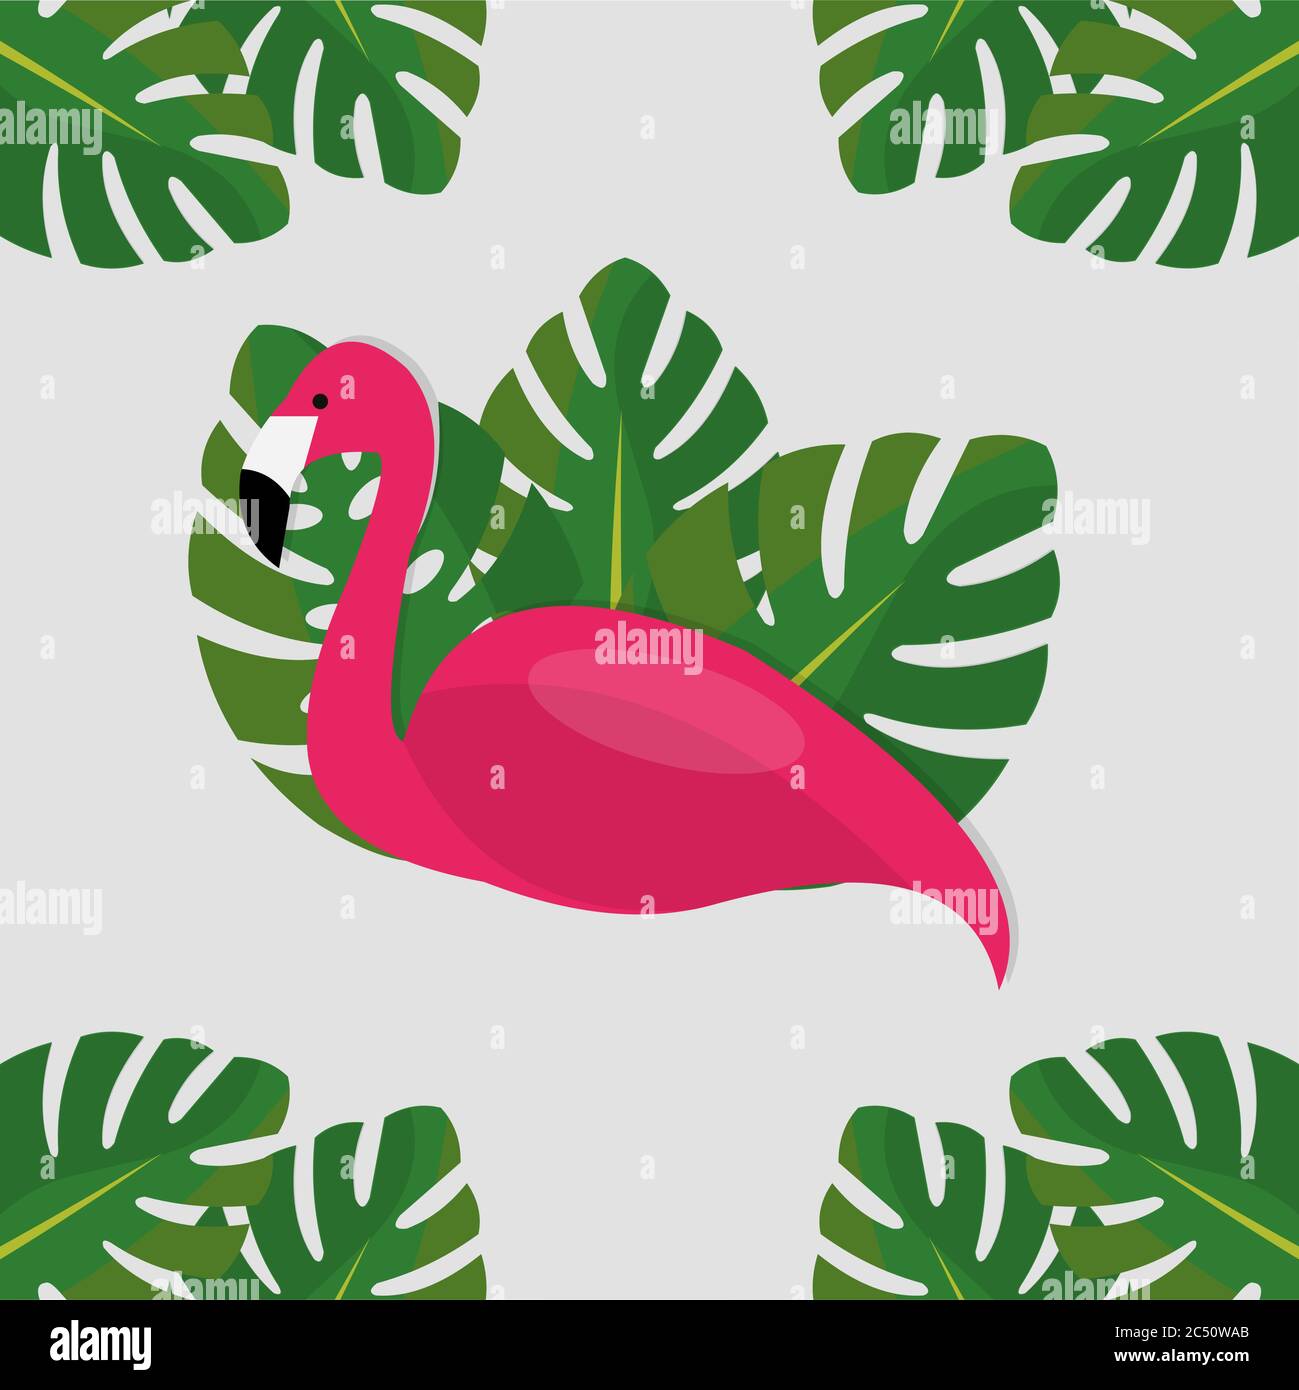 Flamingo with monstera plant vector illustration Stock Vector